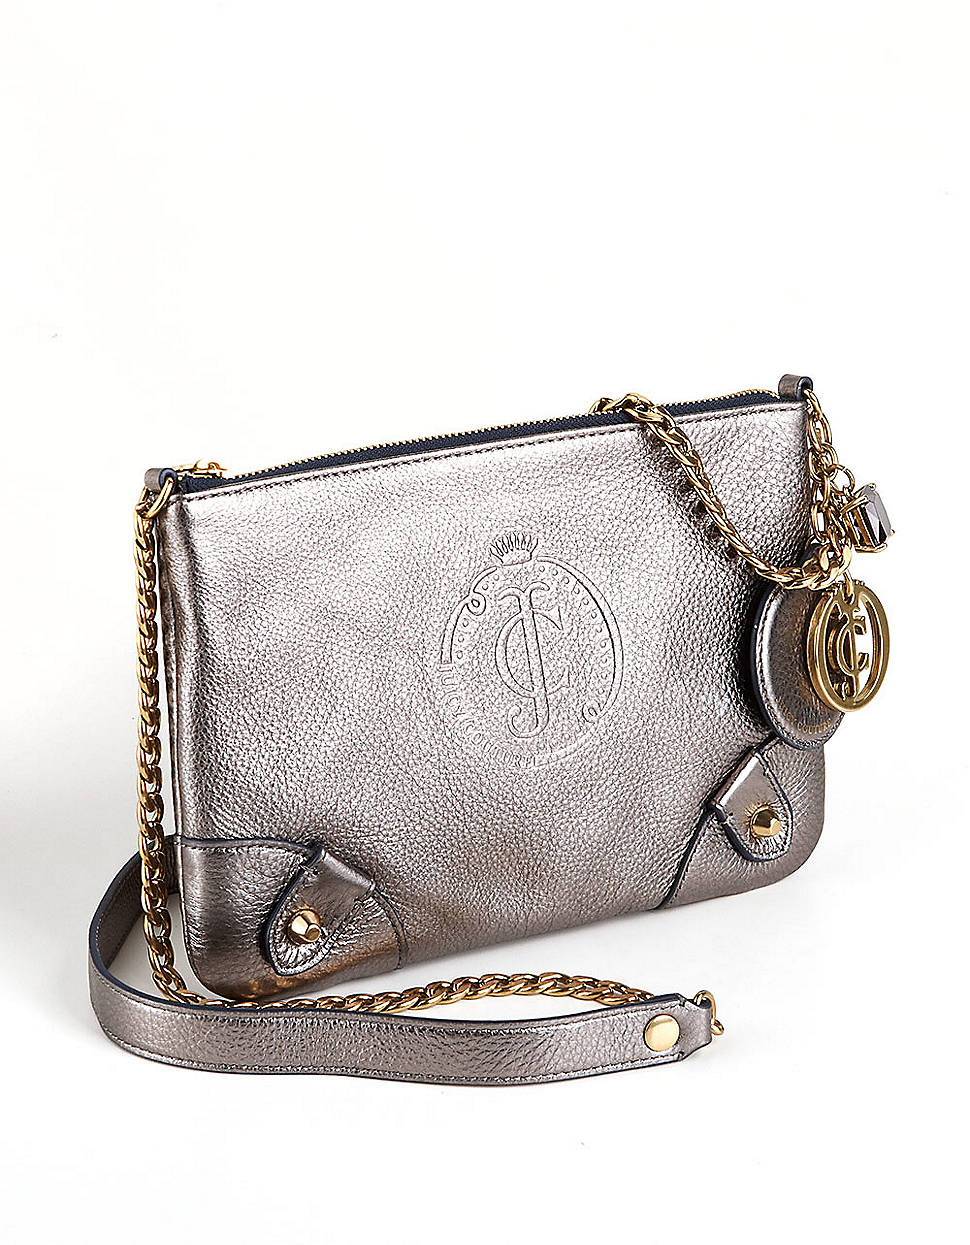 Juicy Couture Louisa Metallic Leather Crossbody Bag in Gray (pewter) | Lyst